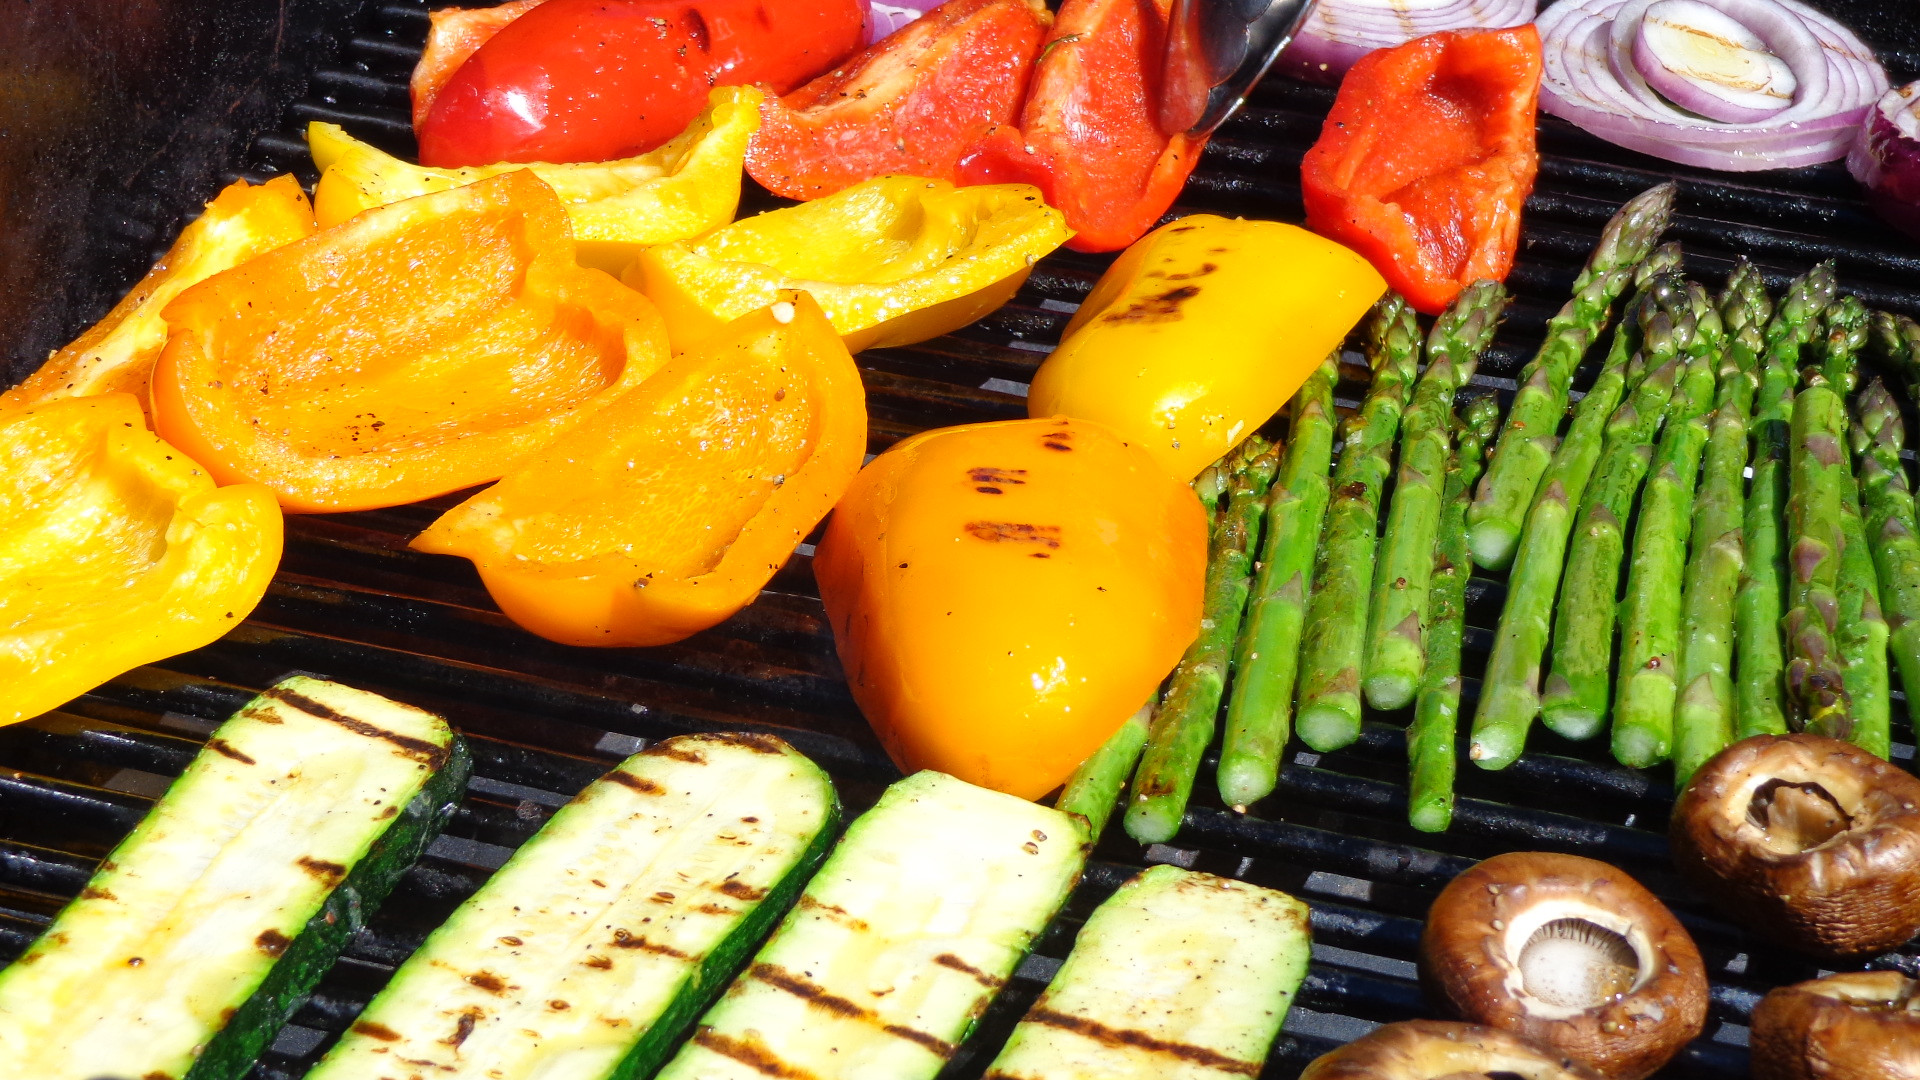 15 Amazing Roasted Vegetables On the Grill